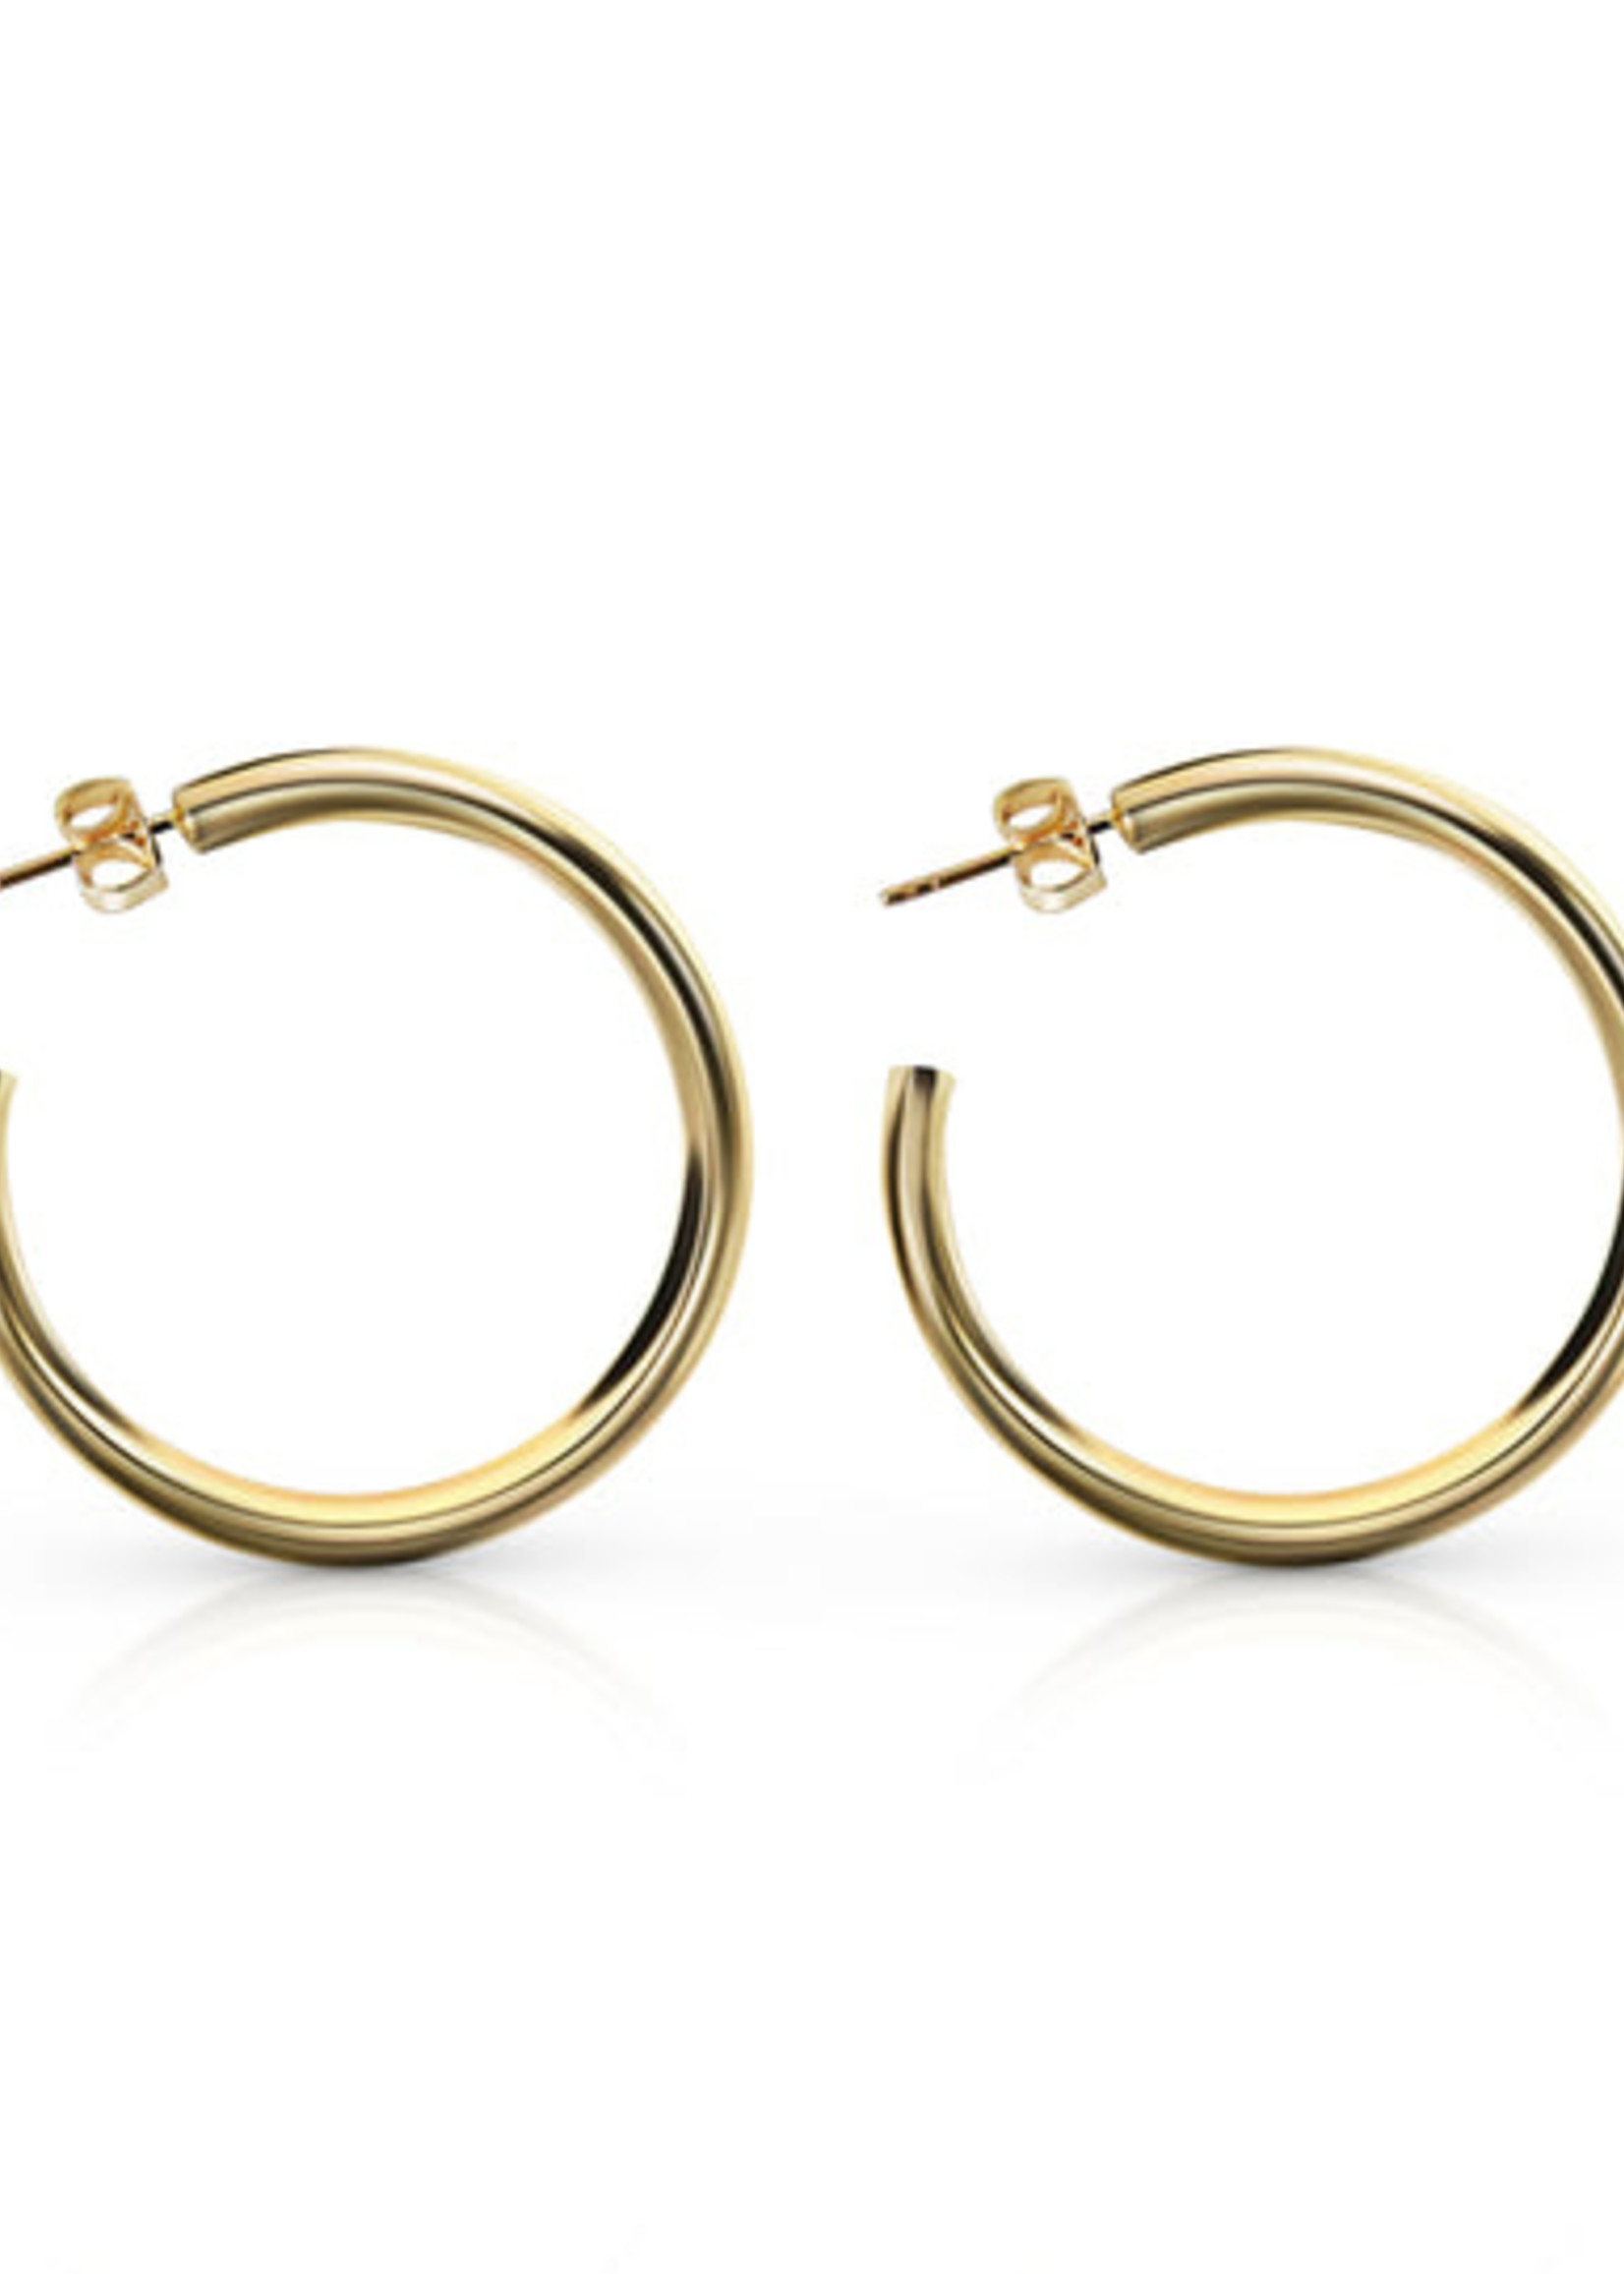 Classic Gold Hoop Large - Angove Street Collective